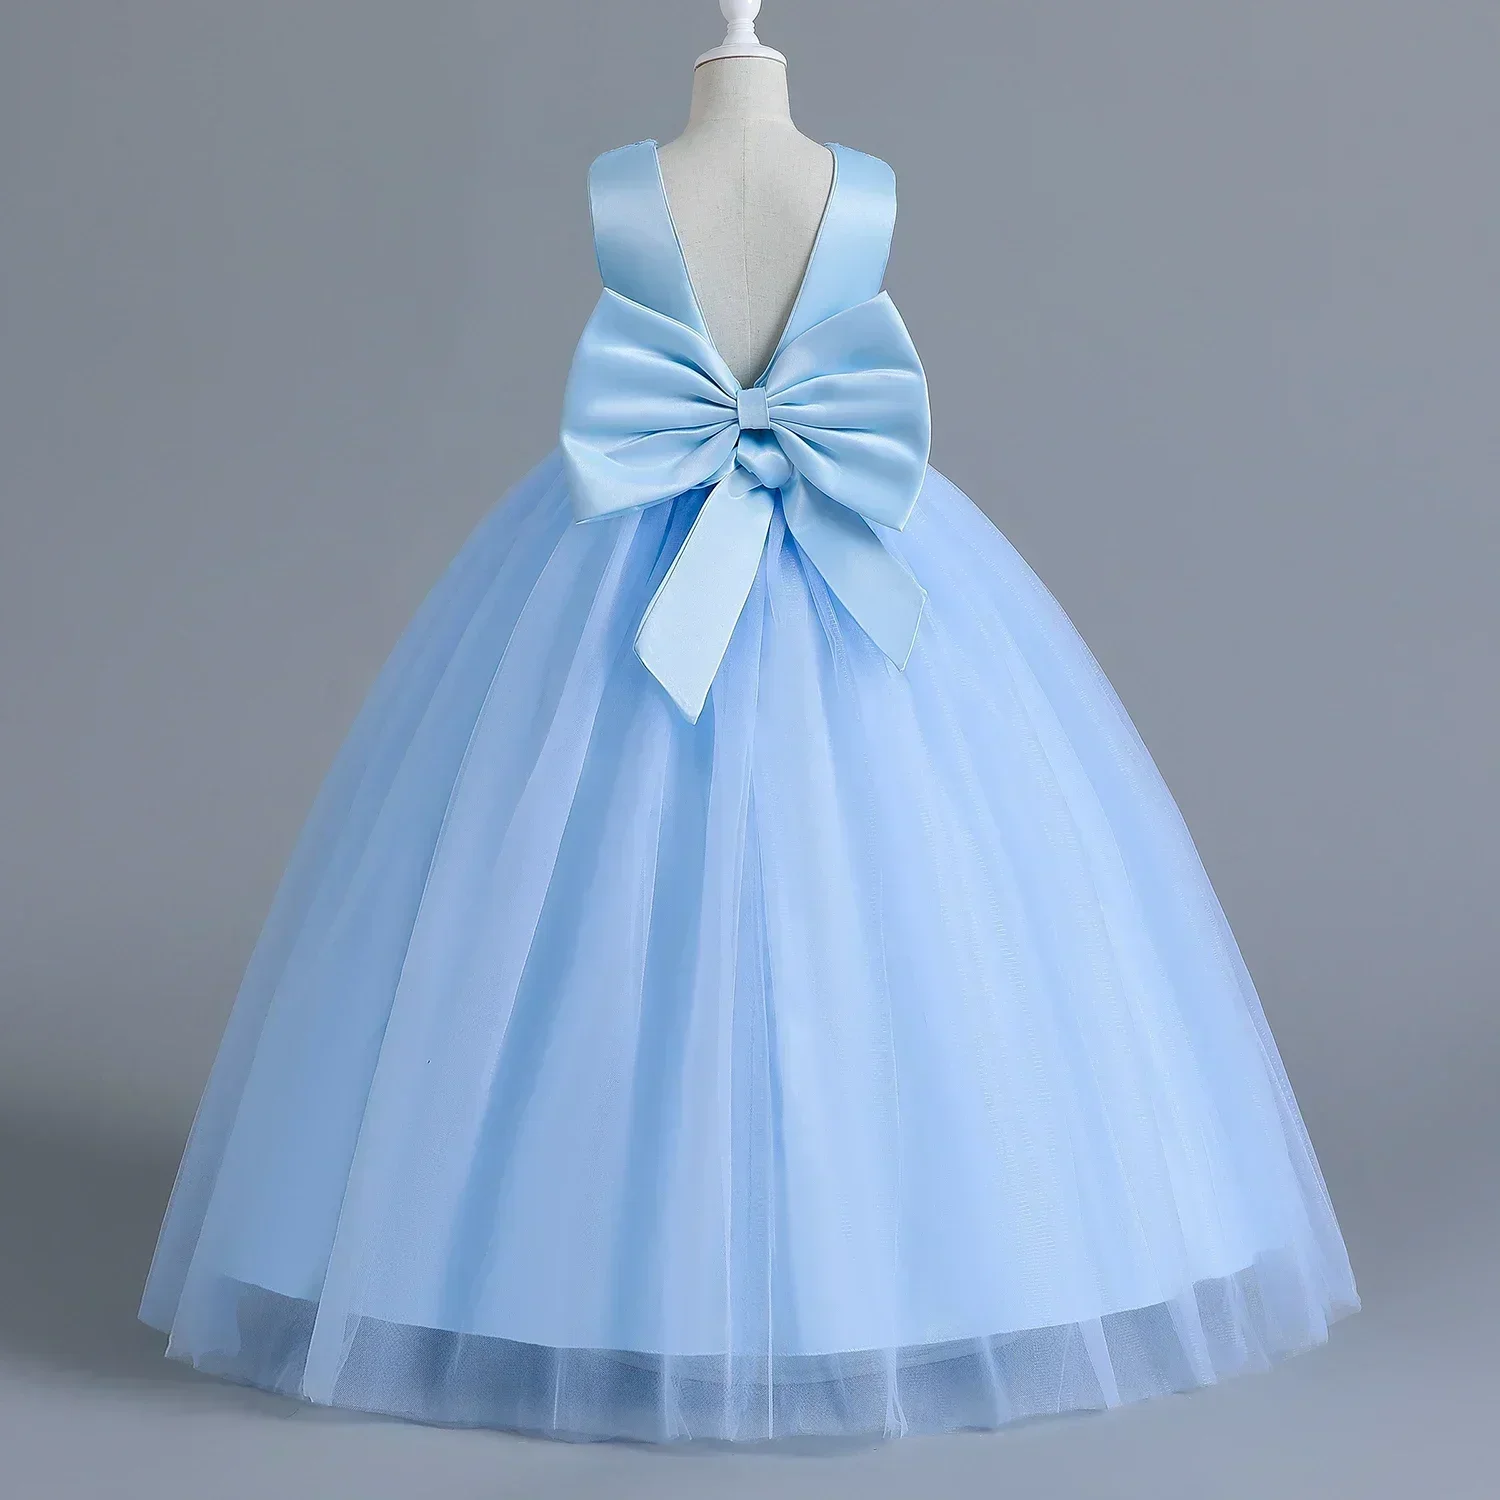 5-14 Yrs Girls Party Dresses Blue Sequined Backless Bow Gala Prom Gown Children Formal Events Costume Birthday Princess Dress